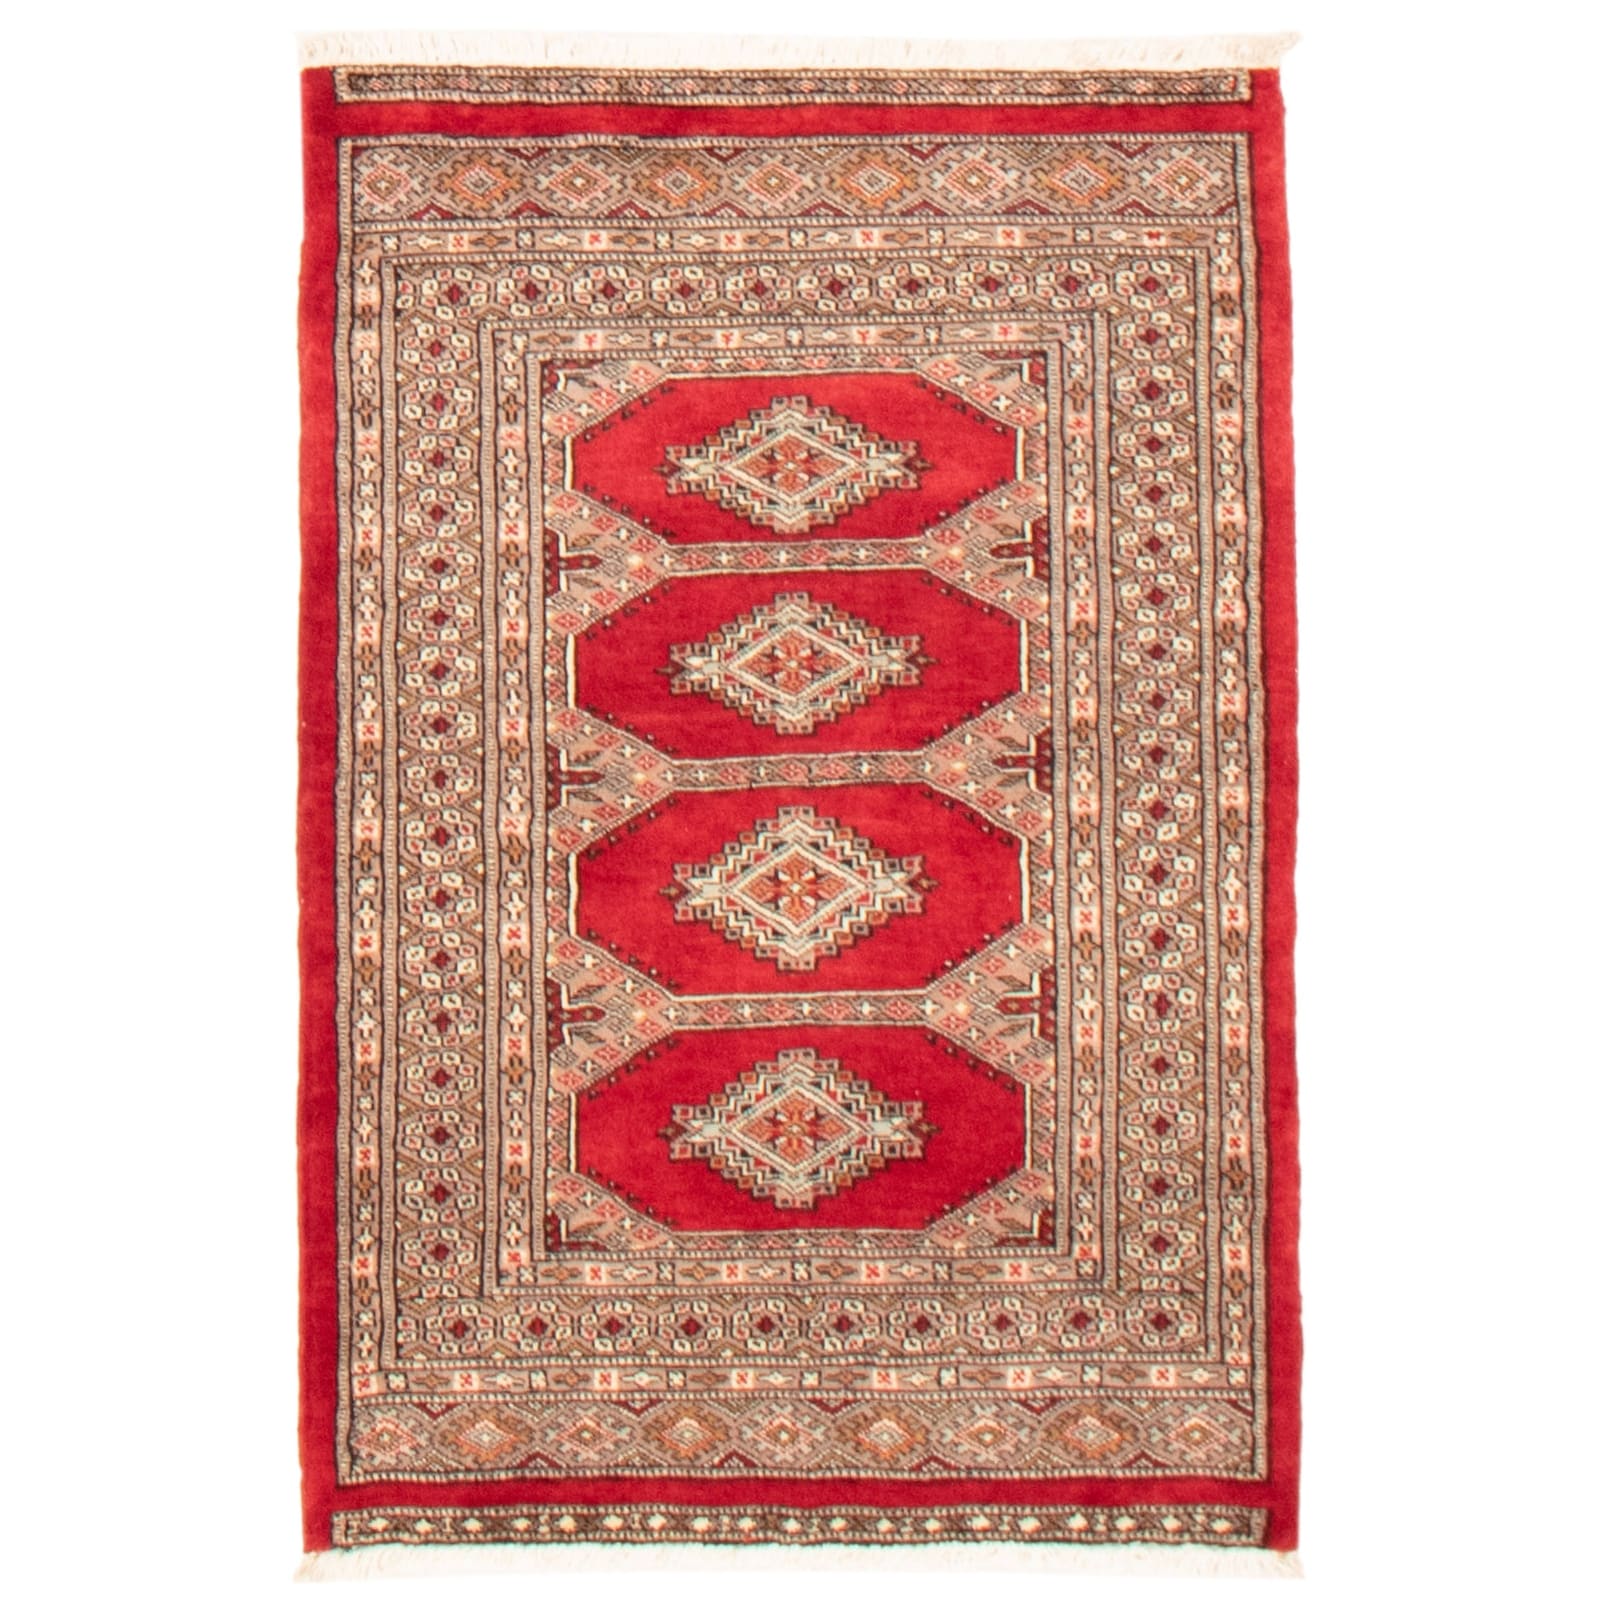 Hand-Knotted Wool Rug 304477 eCarpet Gallery Area Rug for Living Room Bedroom Finest Peshawar Bokhara Bordered Red Rug 4'0 x 6'3 